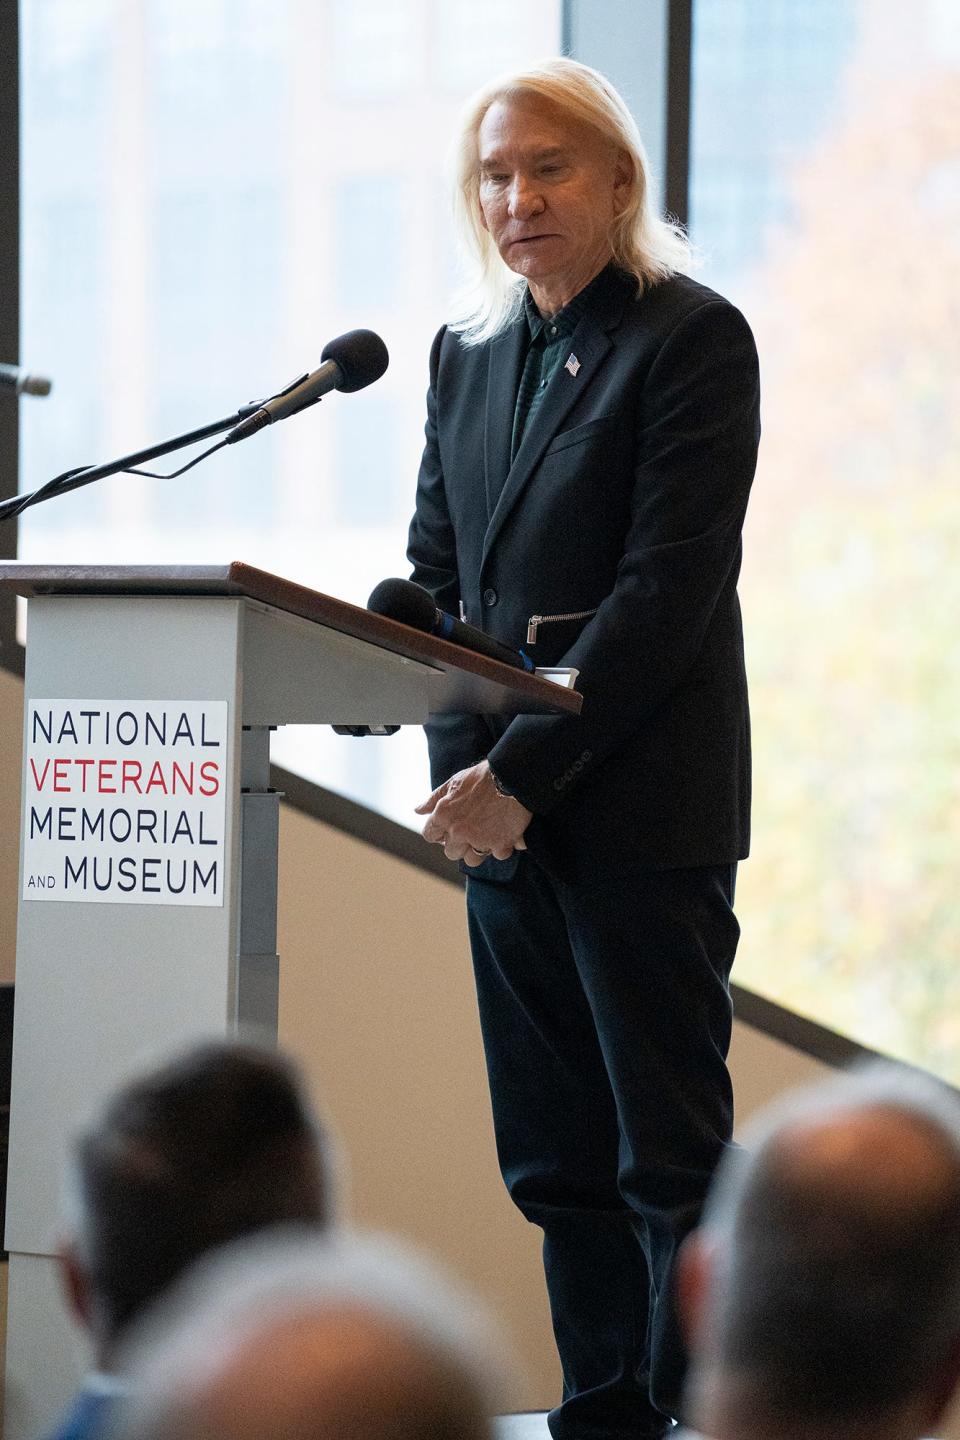 Eagles and James Gang guitarist Joe Walsh, who was 2 years old when his father died while serving in the military, addresses the crowd Friday, Nov. 11, 2022 during the annual Veterans Day ceremony at the National Veterans Memorial and Museum in Columbus.